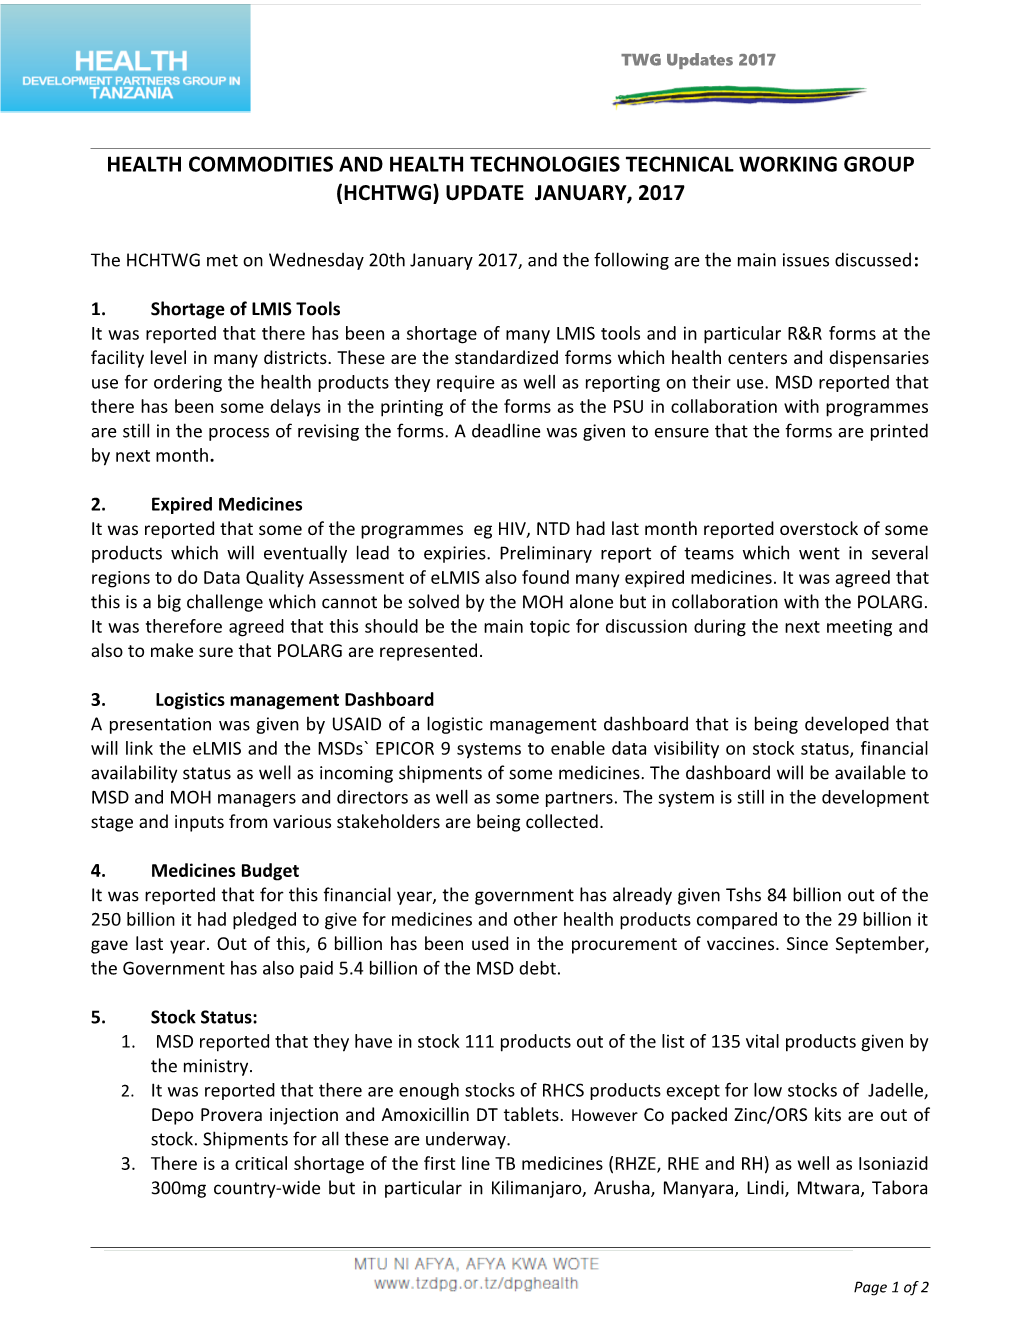 Health Commodities and Health Technologies Technical Working Group (Hchtwg) Update January